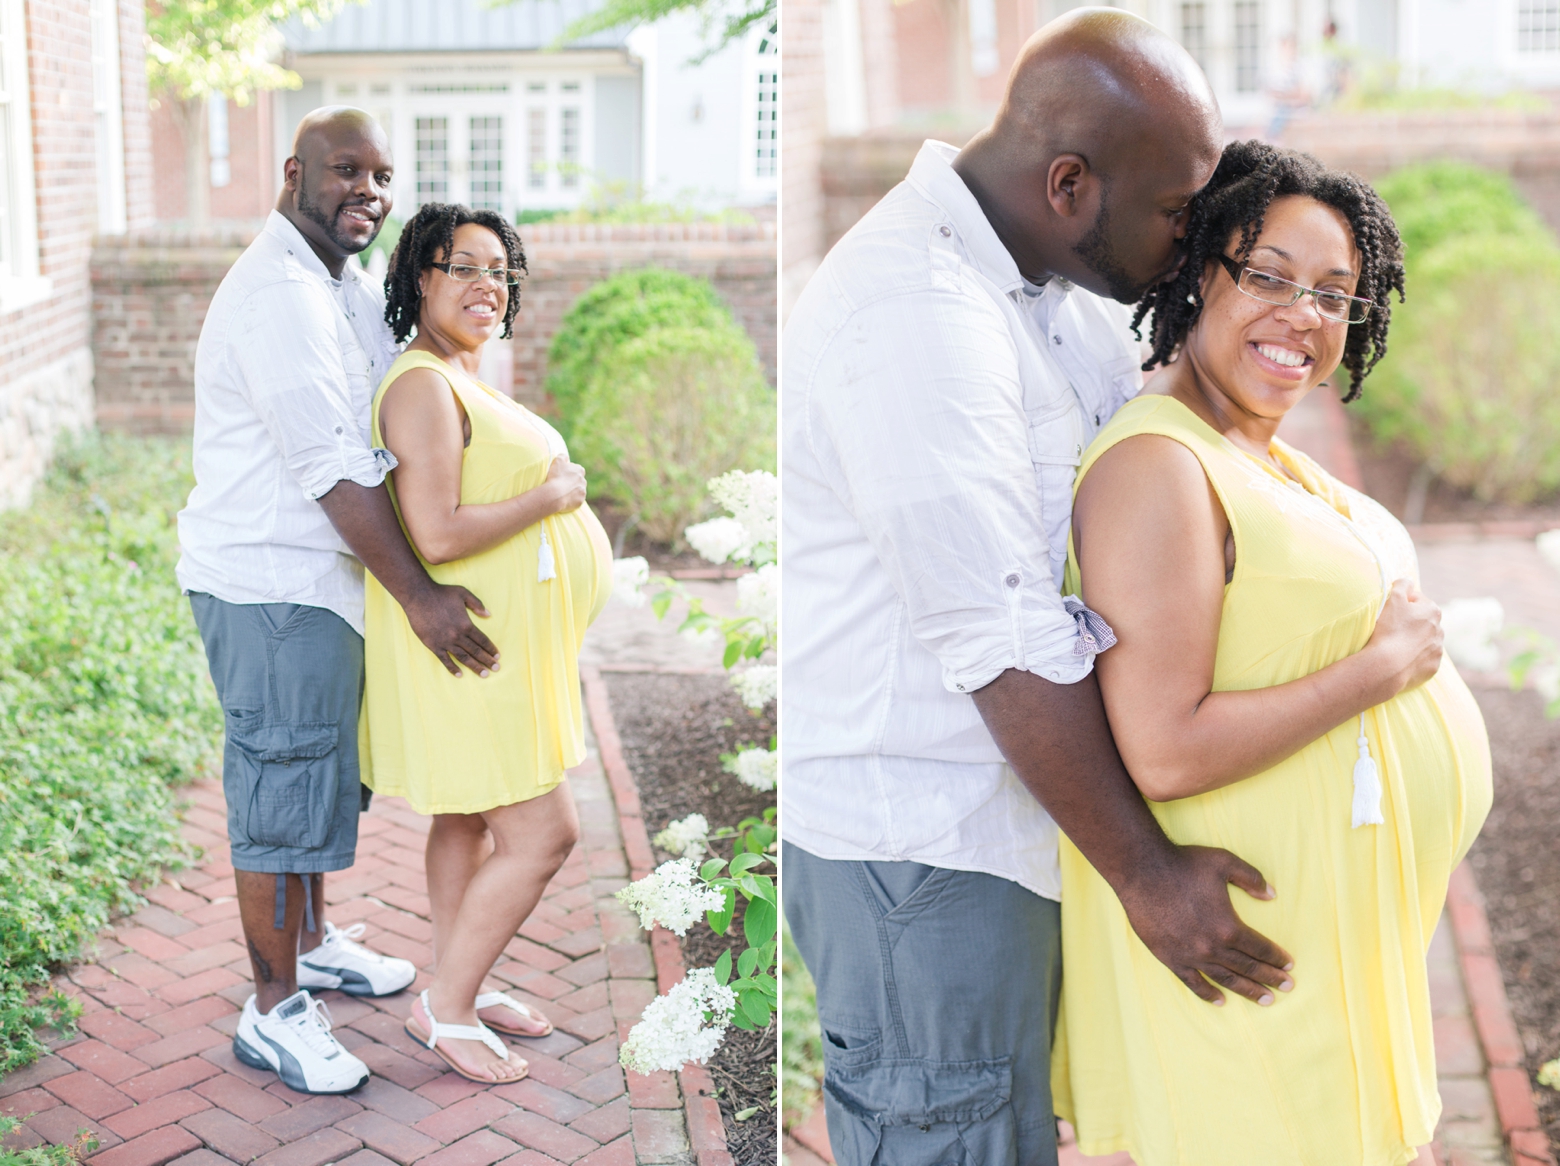 Yorktown Beach Maternity Photography by Angie McPherson Photography